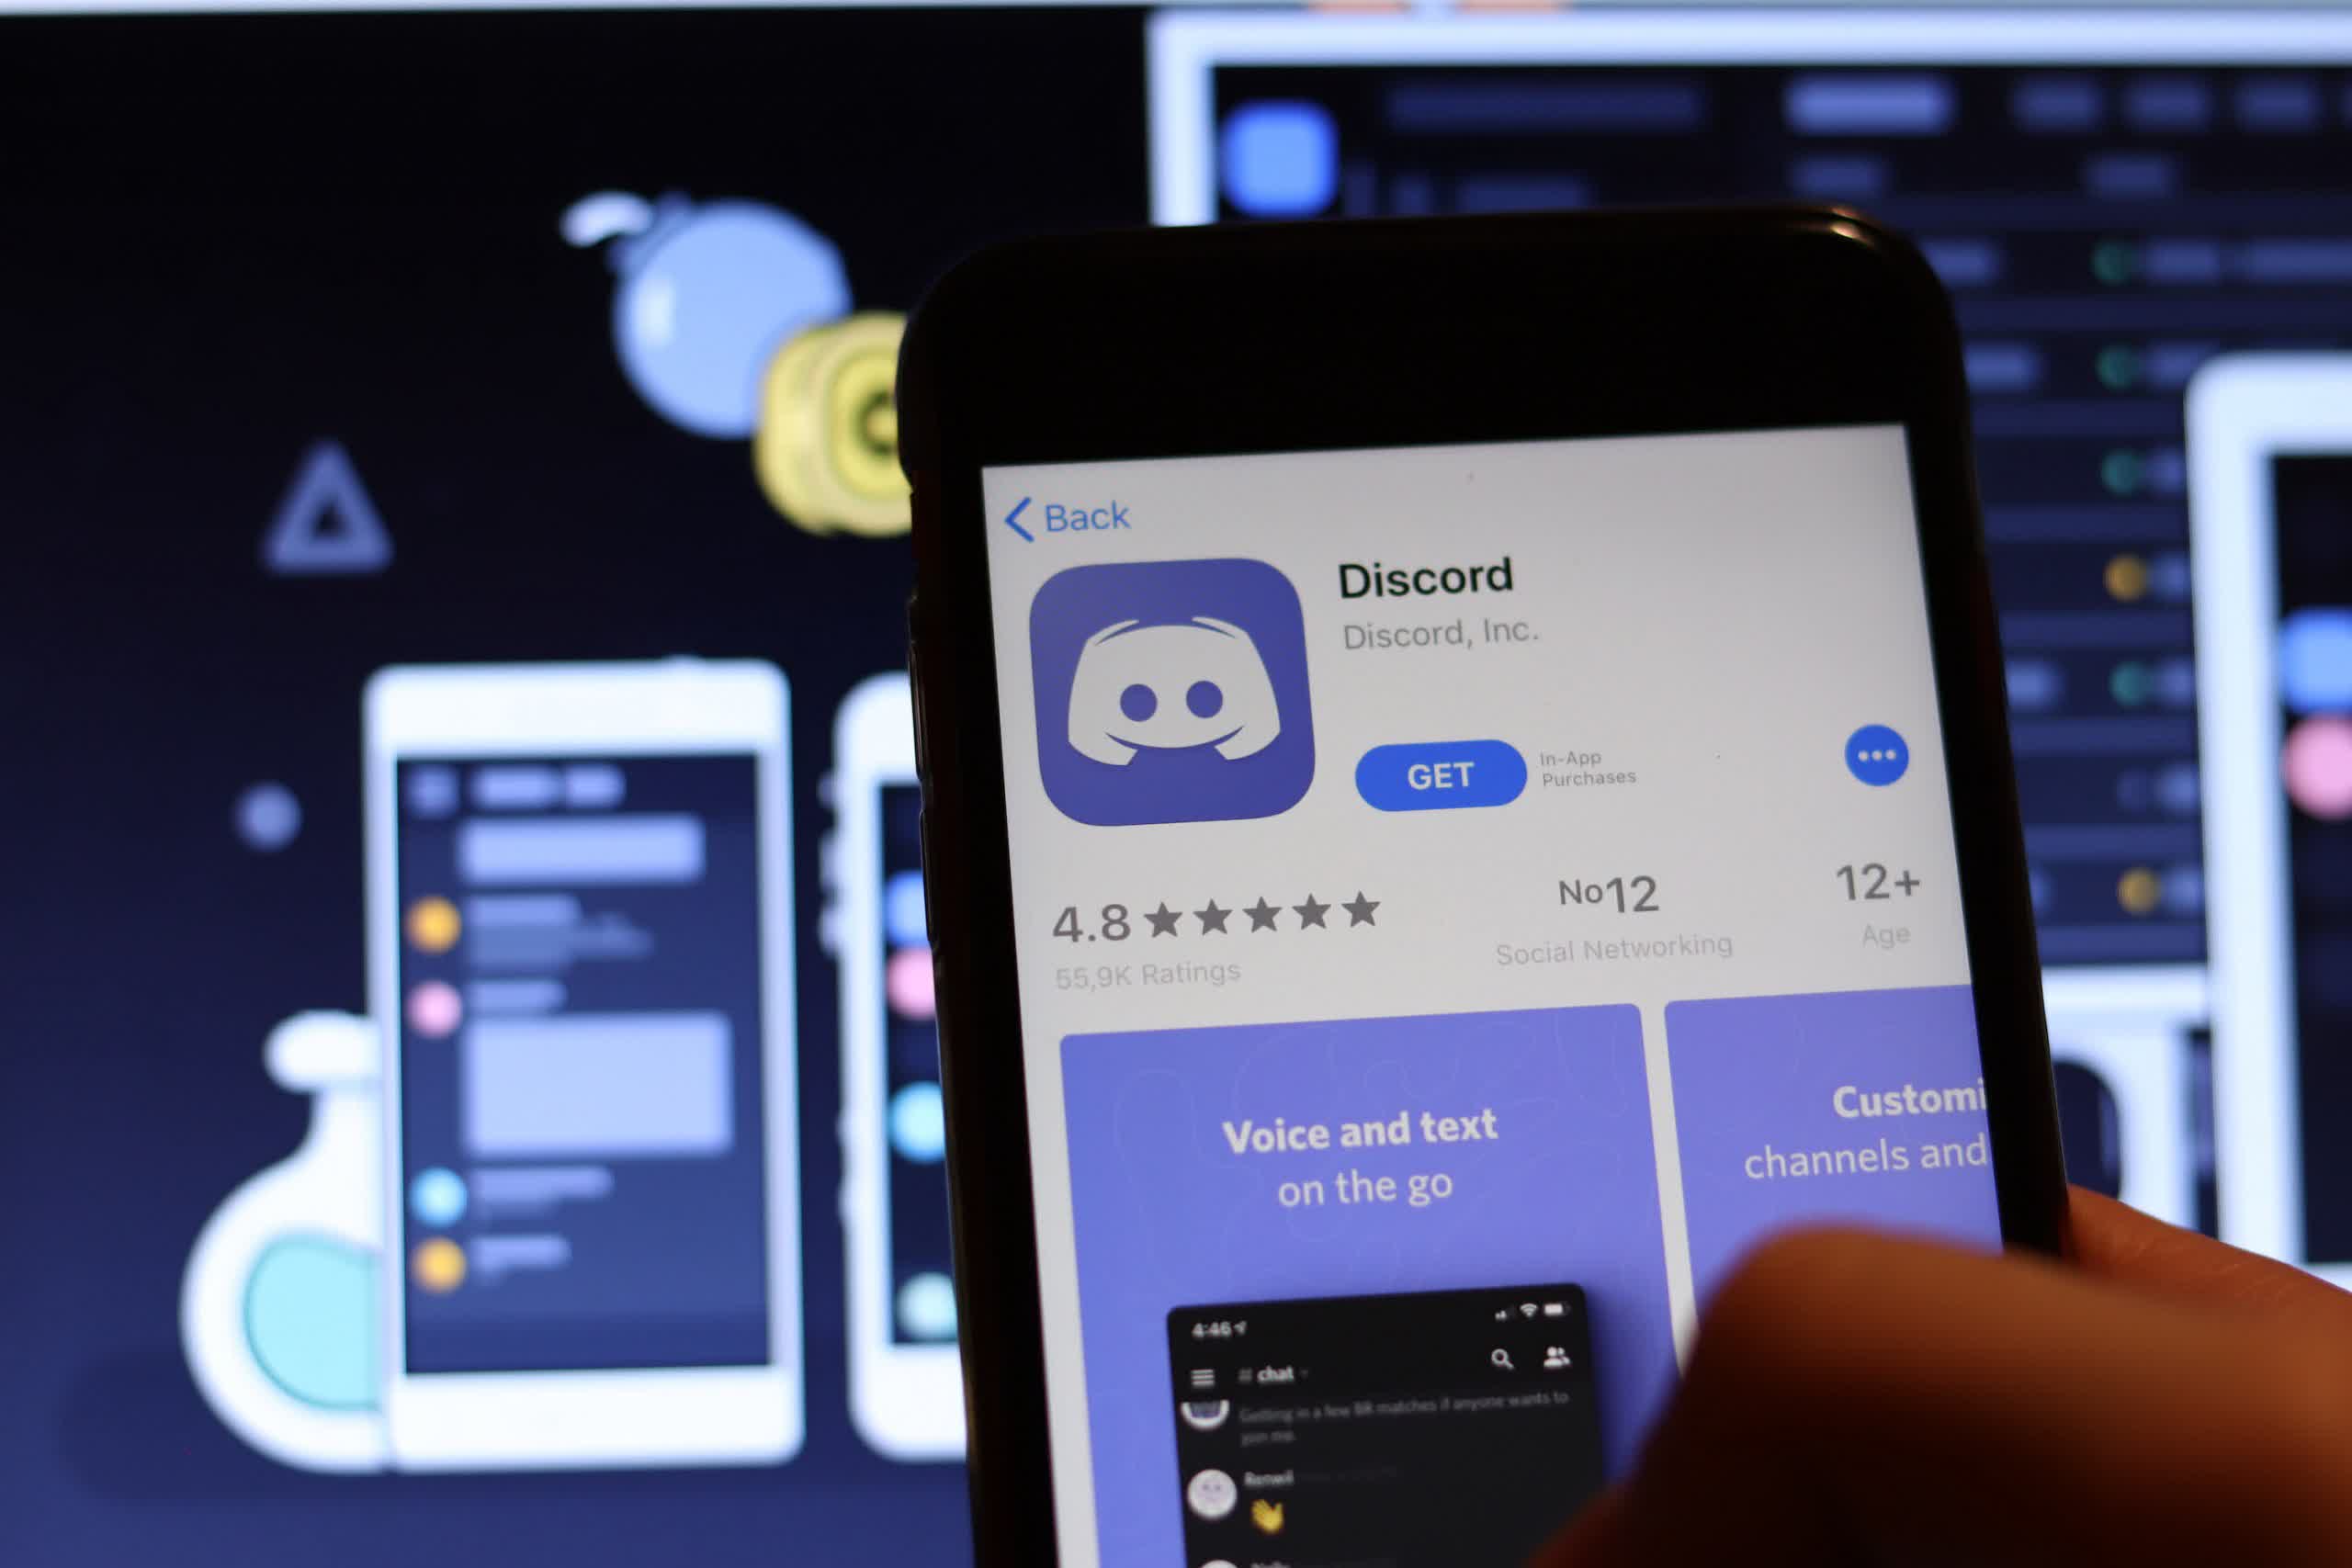 Discord uses App Store loophole to roll back iOS 'NSFW' server ban